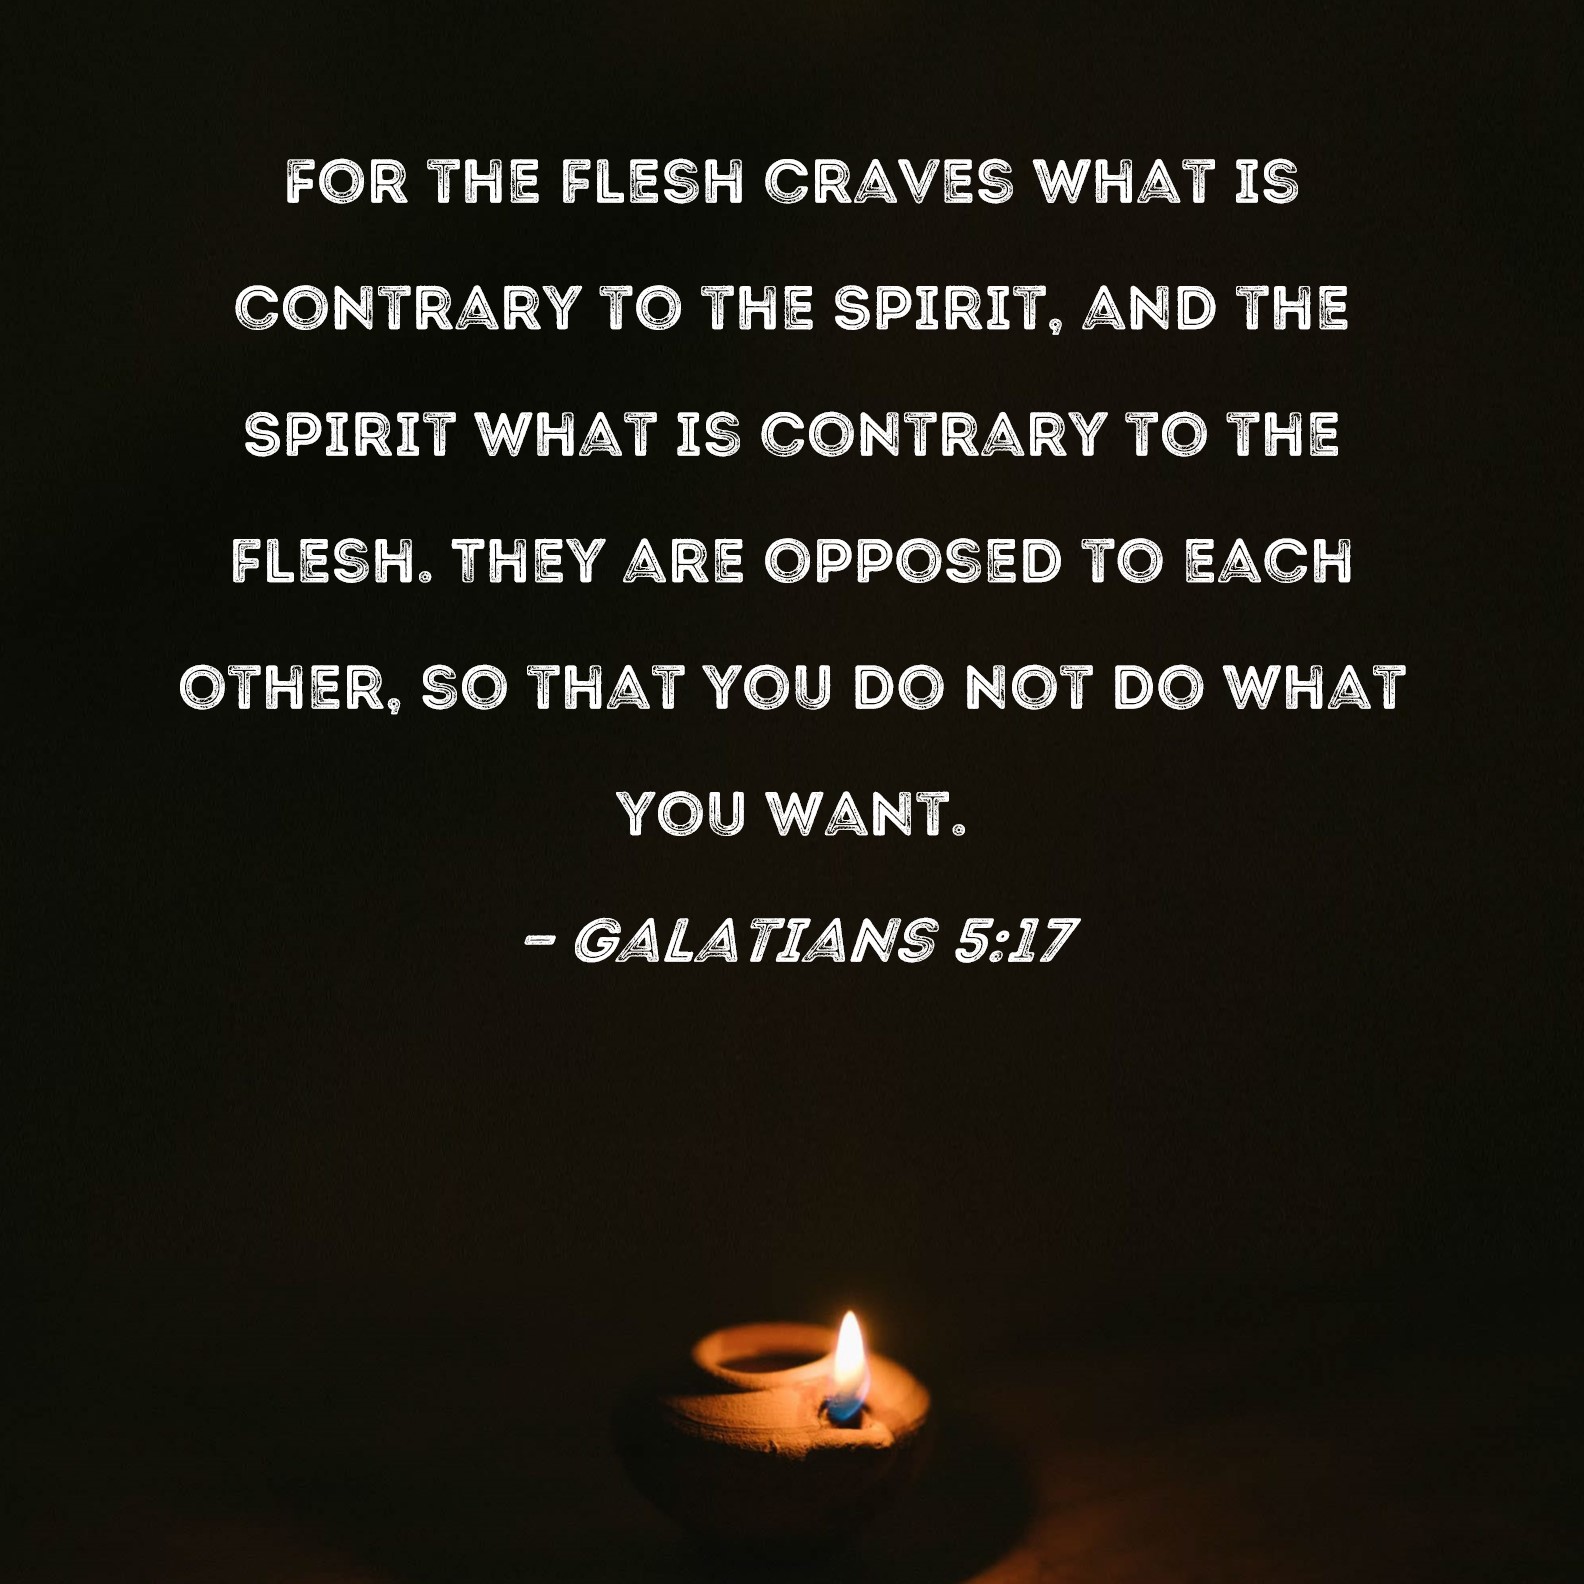 Galatians 5:17 For the flesh craves what is contrary to the Spirit, and the  Spirit what is contrary to the flesh. They are opposed to each other, so  that you do not